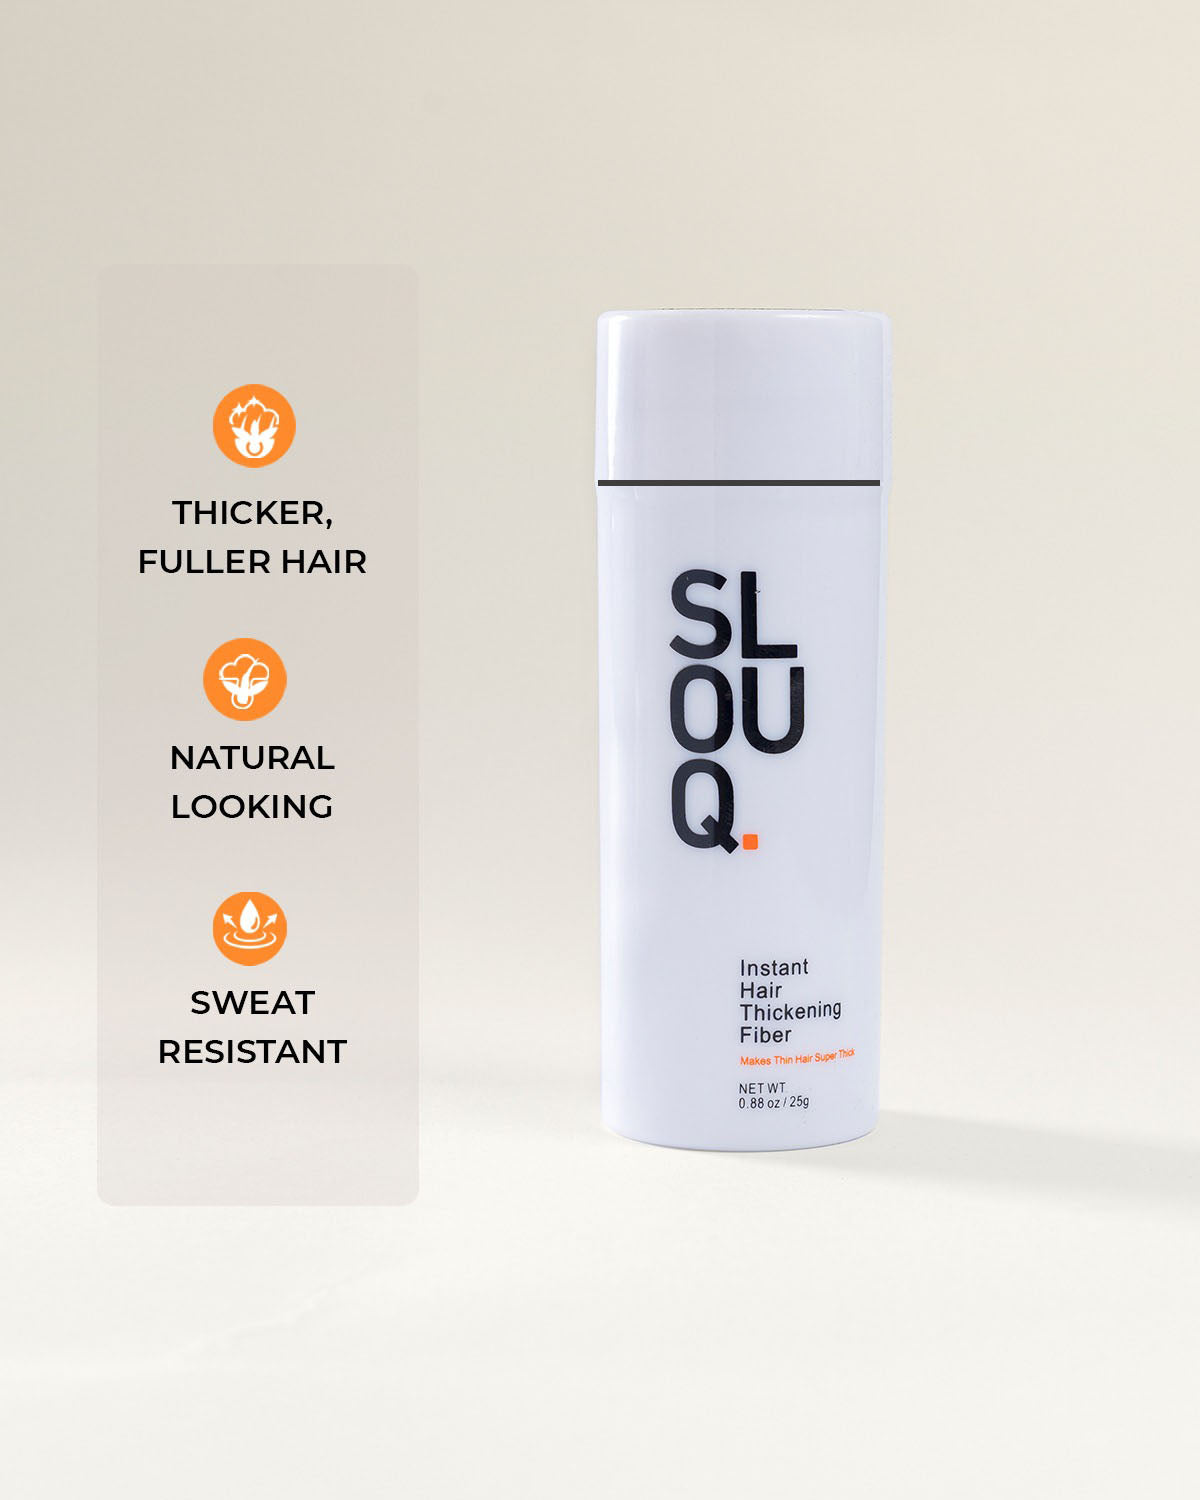 Slouq Hair Thickening Fibers - Instantly Conceals Hair Loss for Men &amp; Women - 25gm